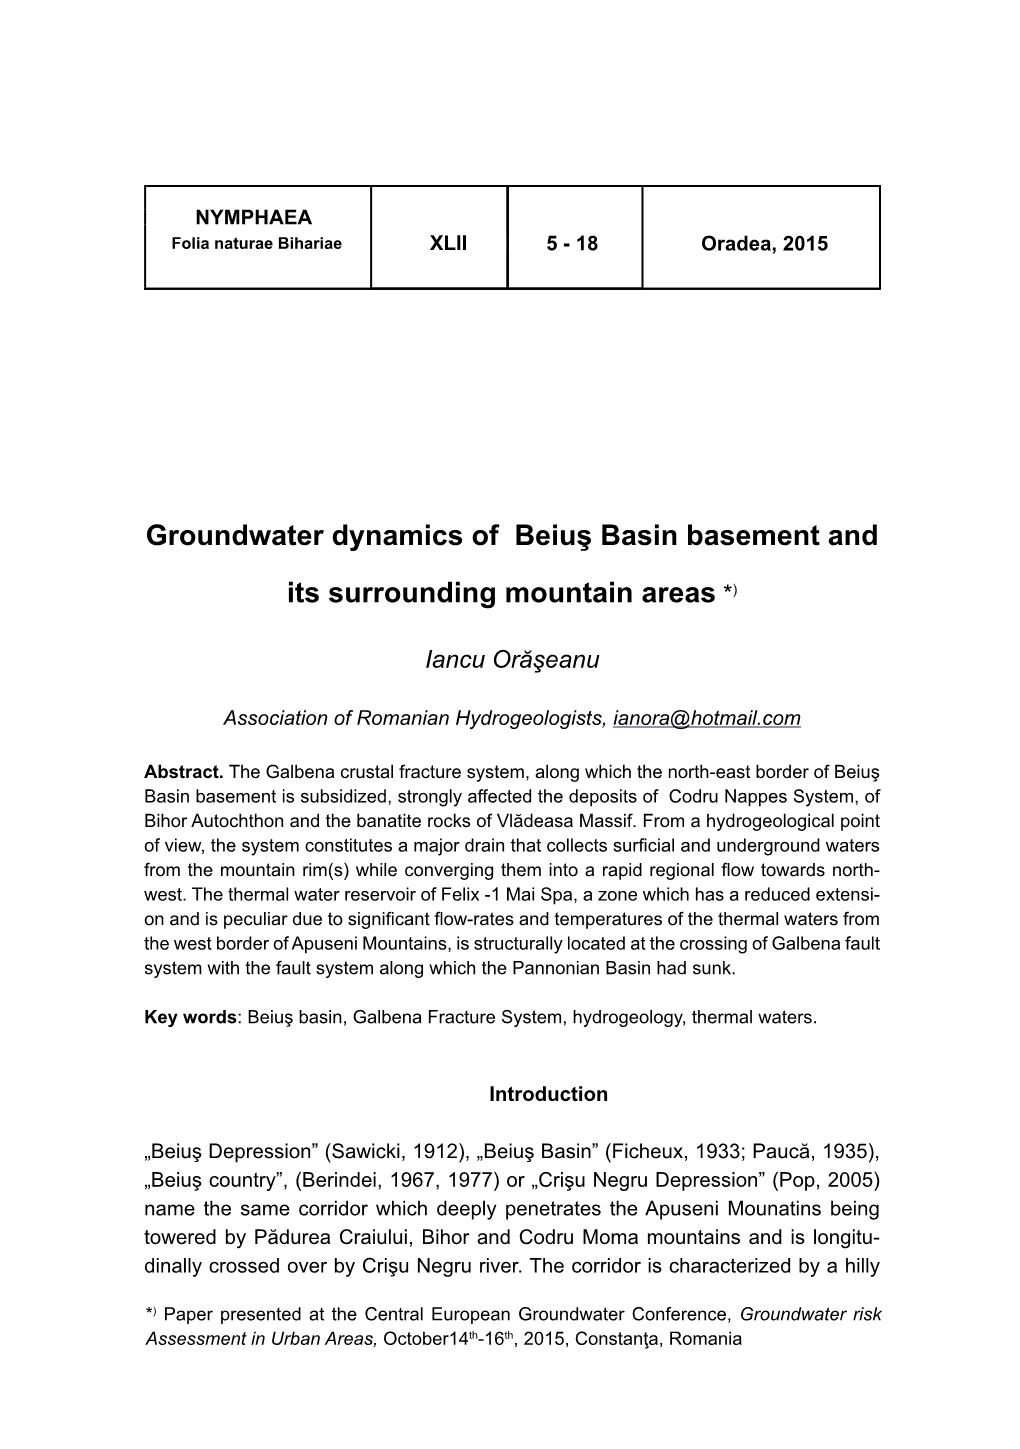 Groundwater Dynamics of Beiuş Basin Basement and Its Surrounding